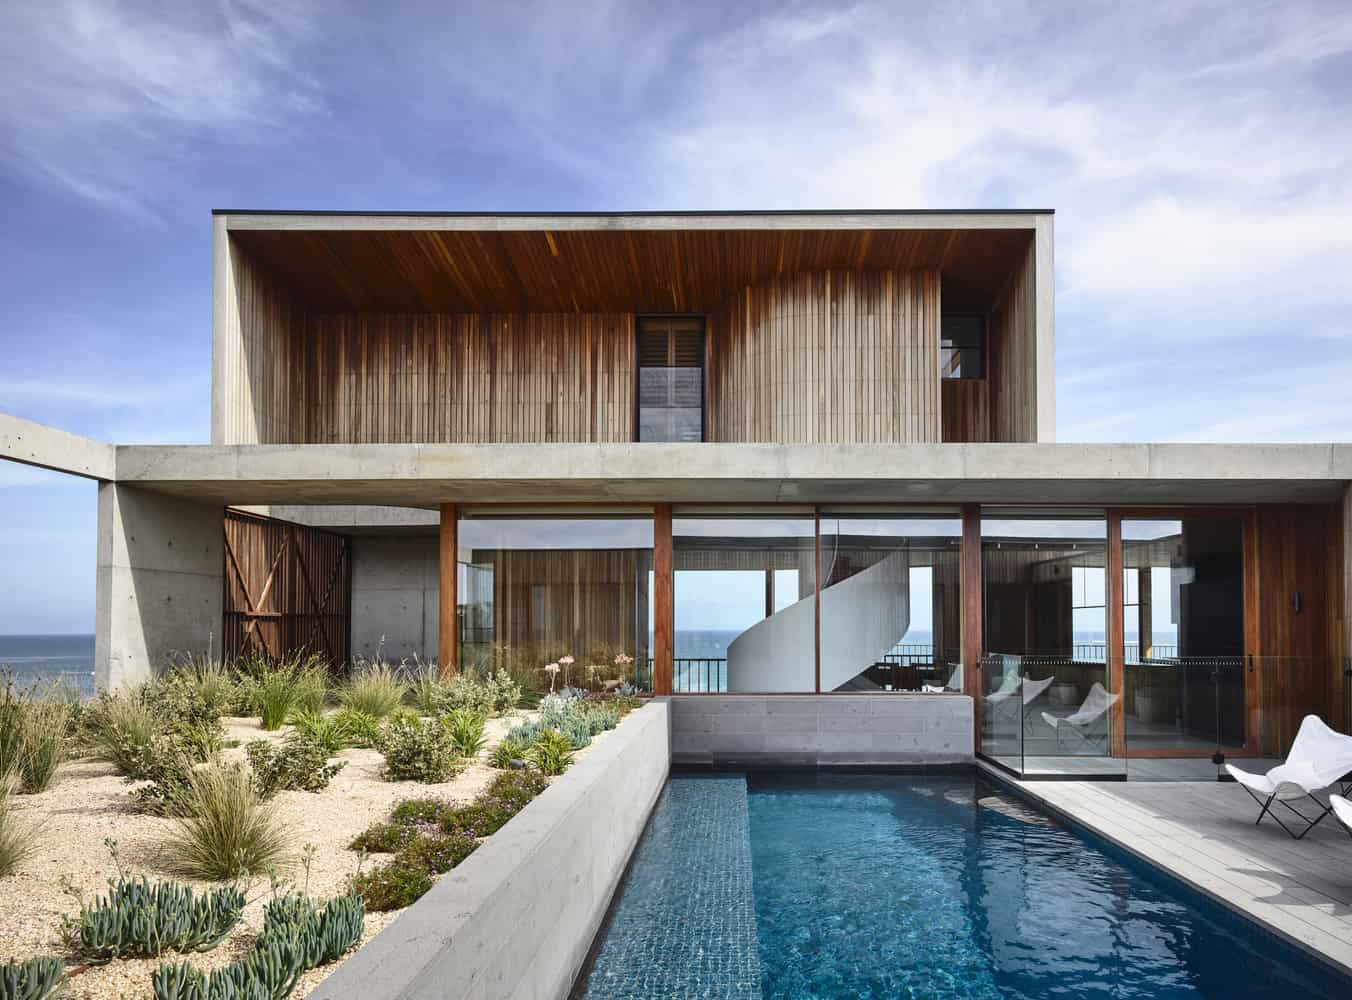 A multi-generational beach house in Australia with tranquil seaside views